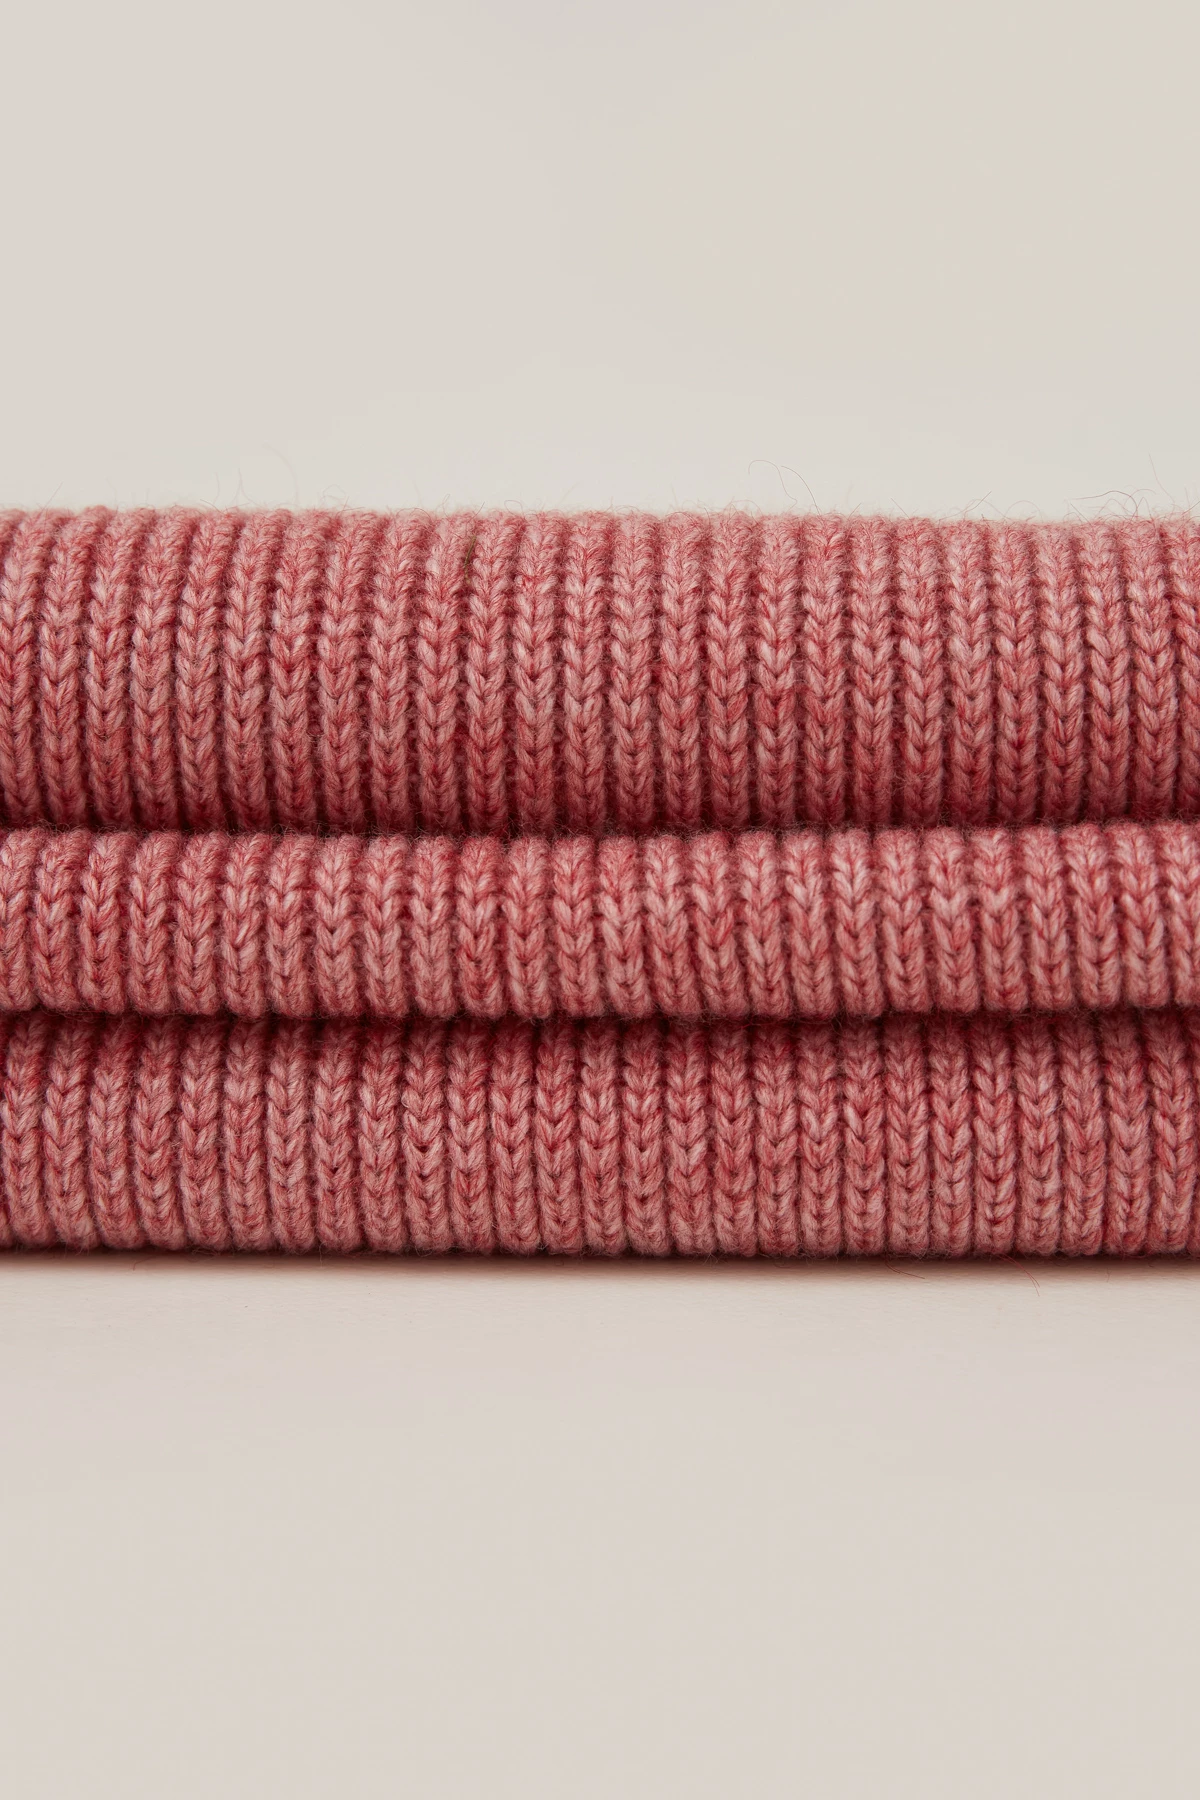 Knitted woolen pink scarf, photo 2